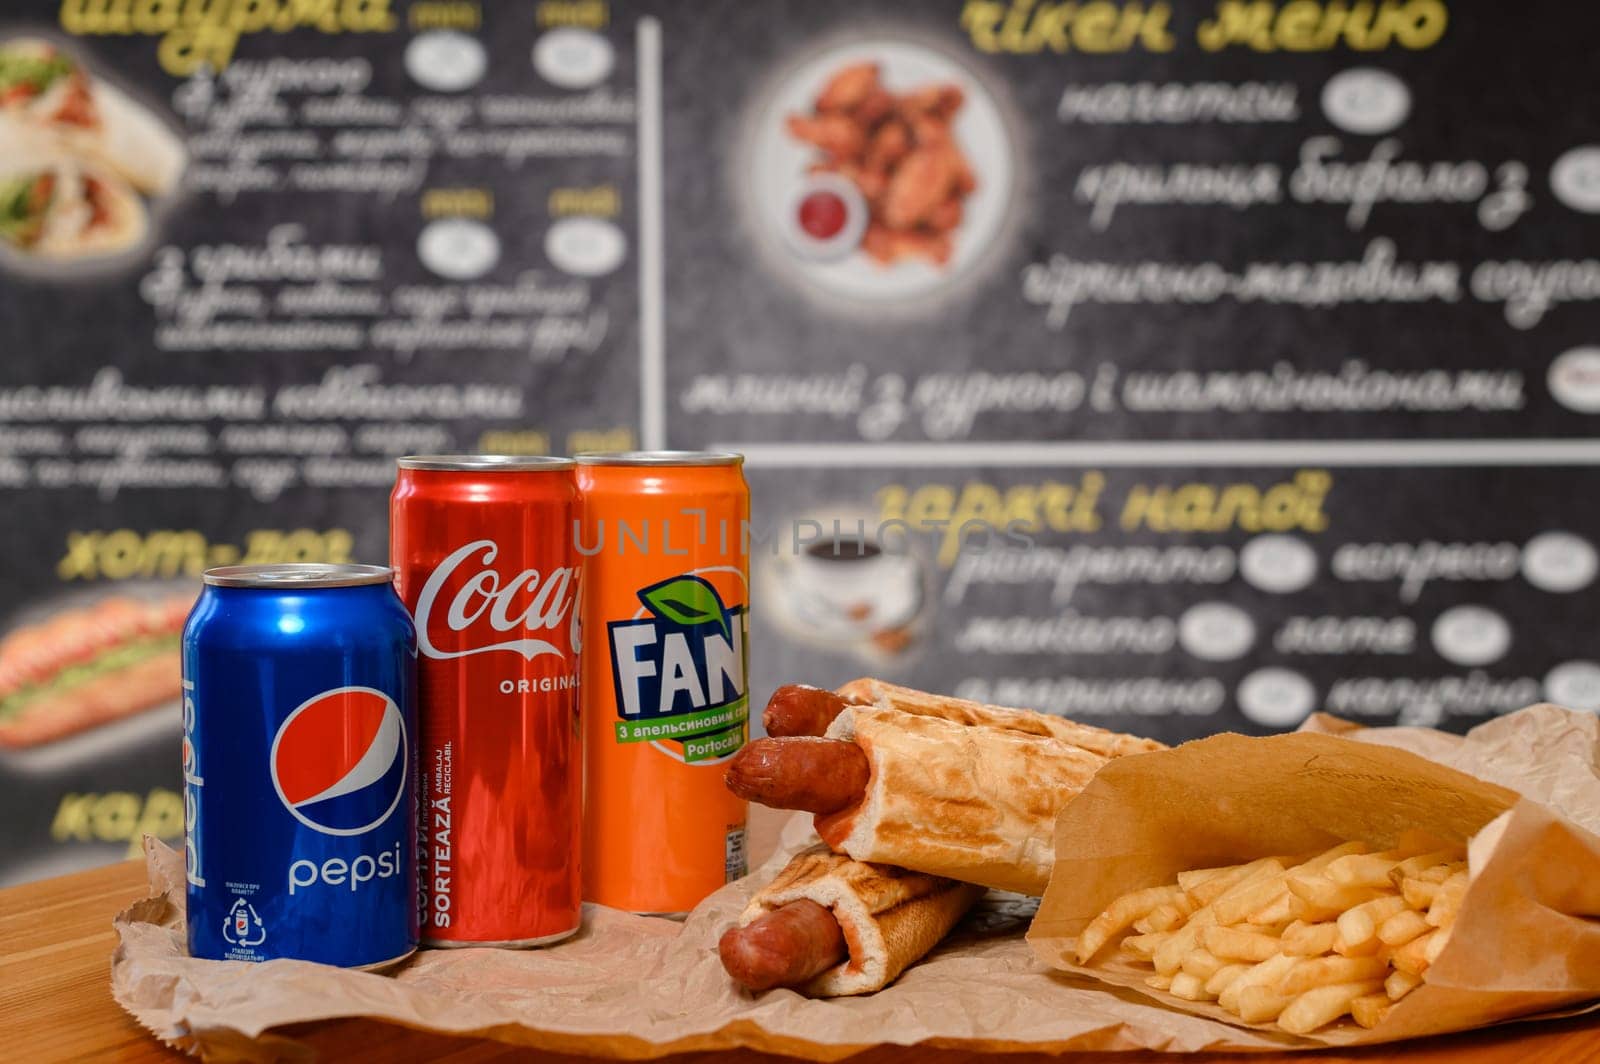 Ivano-Frankivsk, Ukraine March 26, 2023: three bottles of coke, fanta and pepsi with hotdogs and french fries on the table. by Niko_Cingaryuk